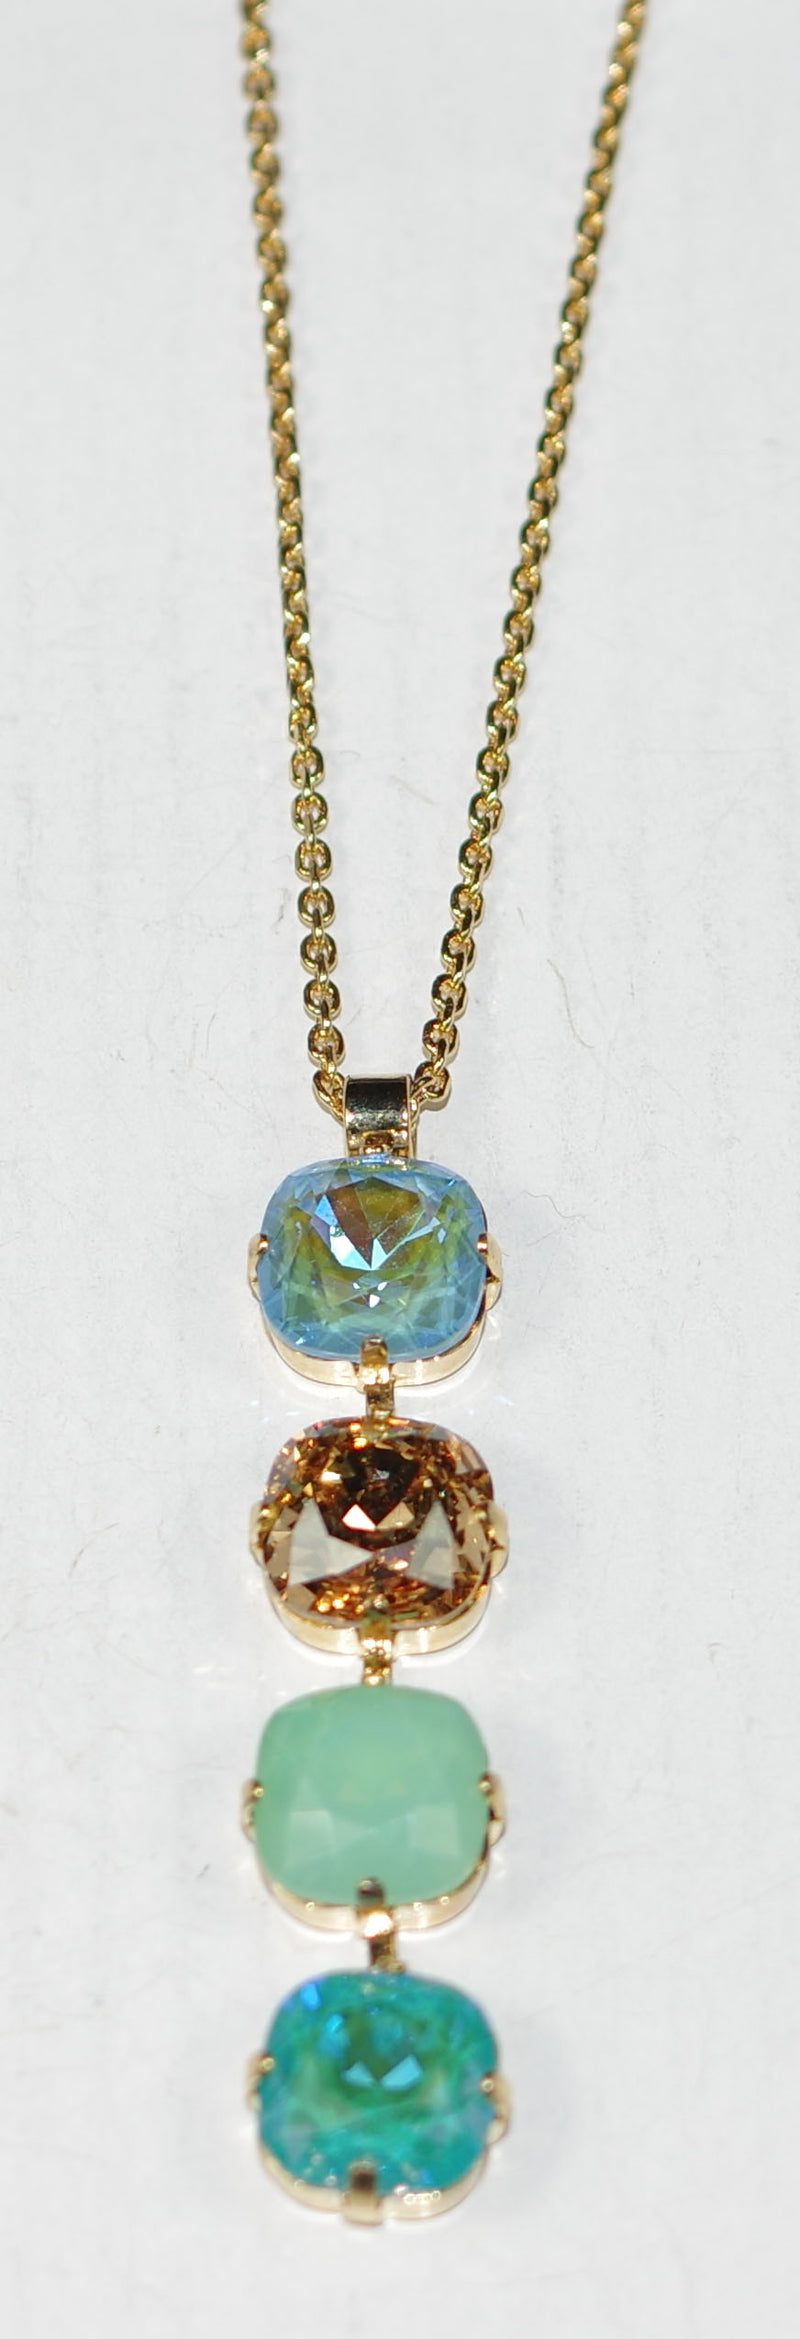 MARIANA PENDANT FAIRYTALE: blue, amber, pacific opal stones, in 1.75" yellow gold setting, 20" adjustable chain